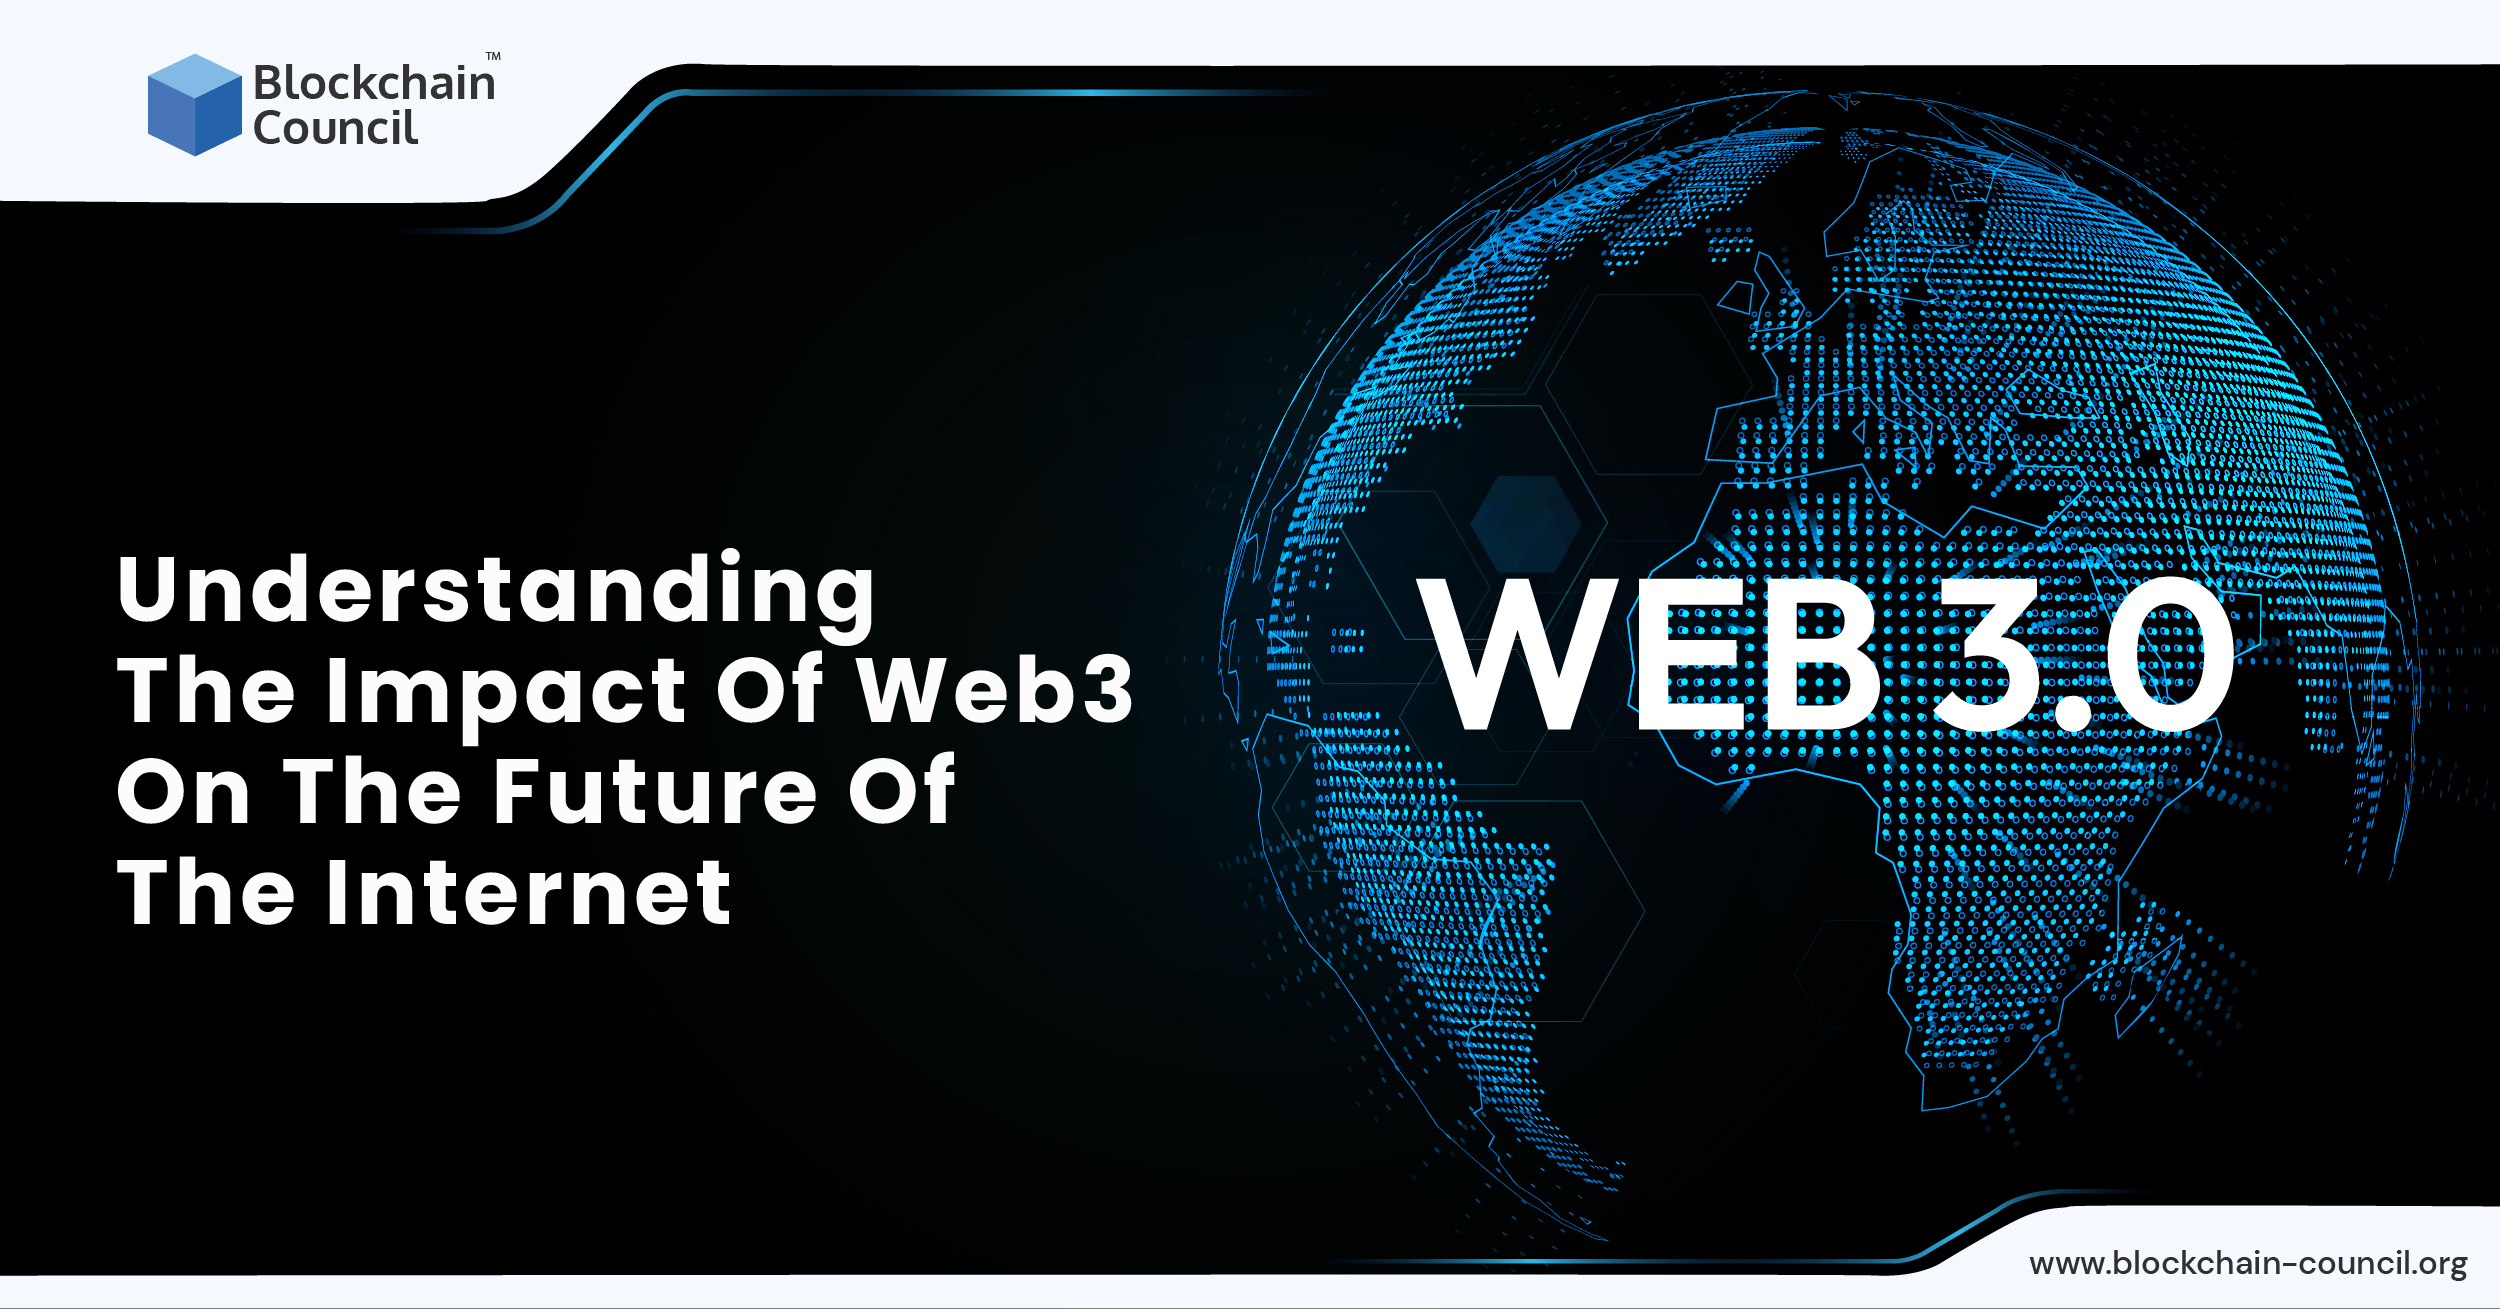 Understanding The Impact Of Web3 On The Future Of The Internet